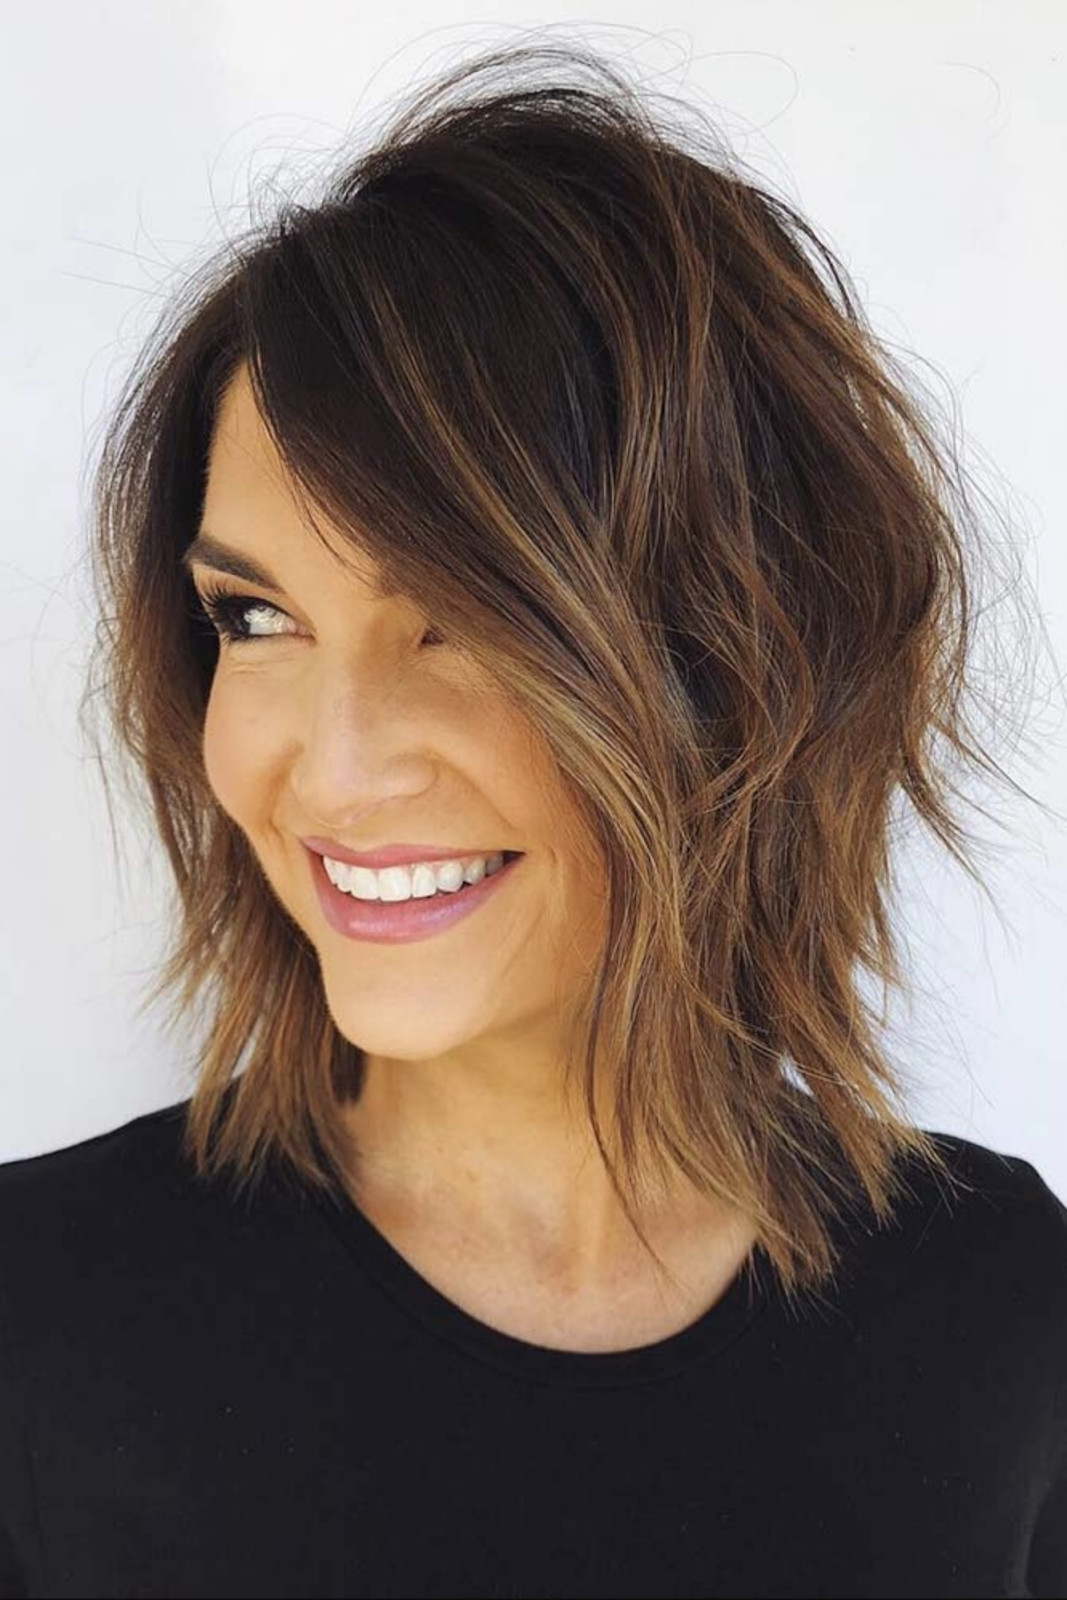 New Hairstyle 2020 For Women
 2019 2020 Short Hairstyles for Women Over 50 That Are